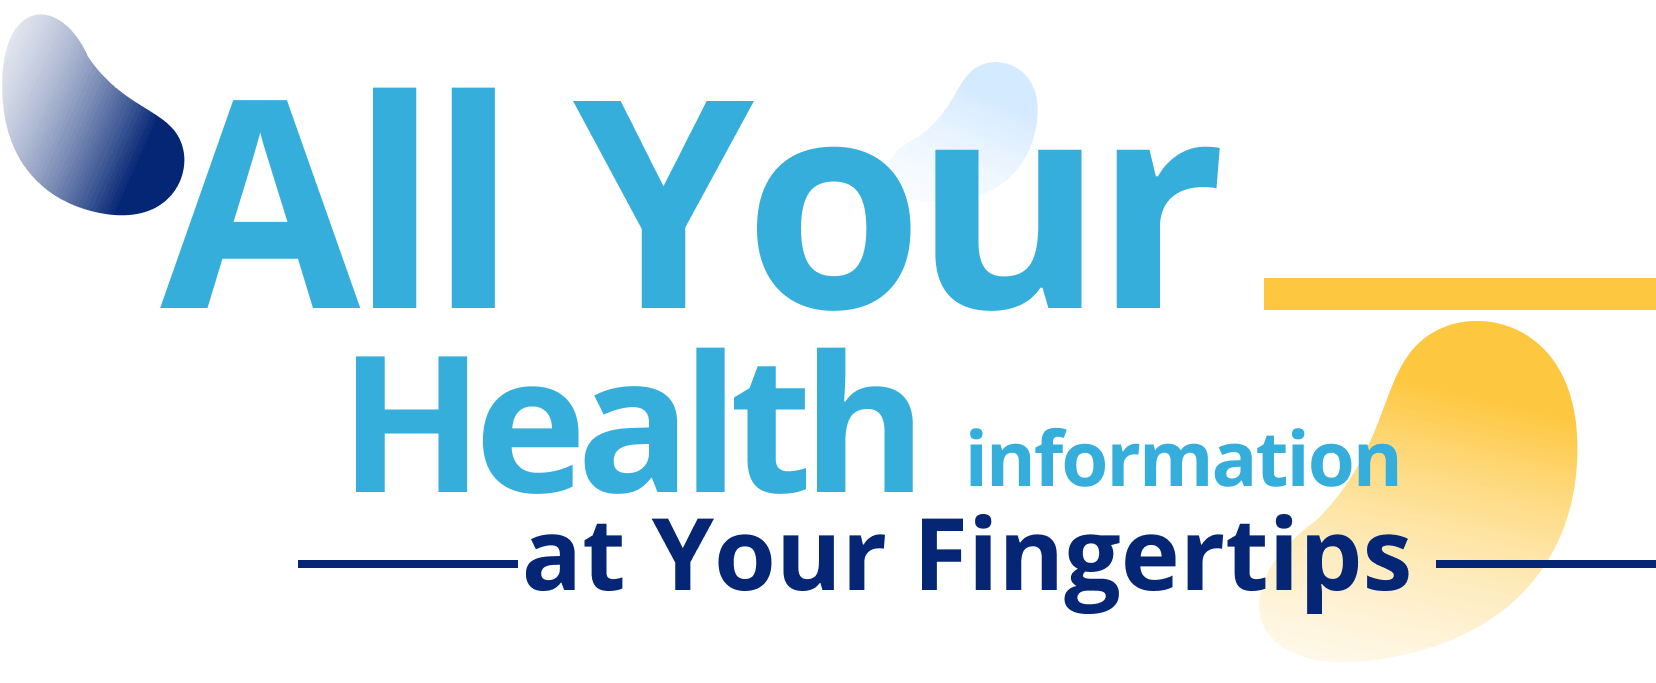 All your health information at your fingertips